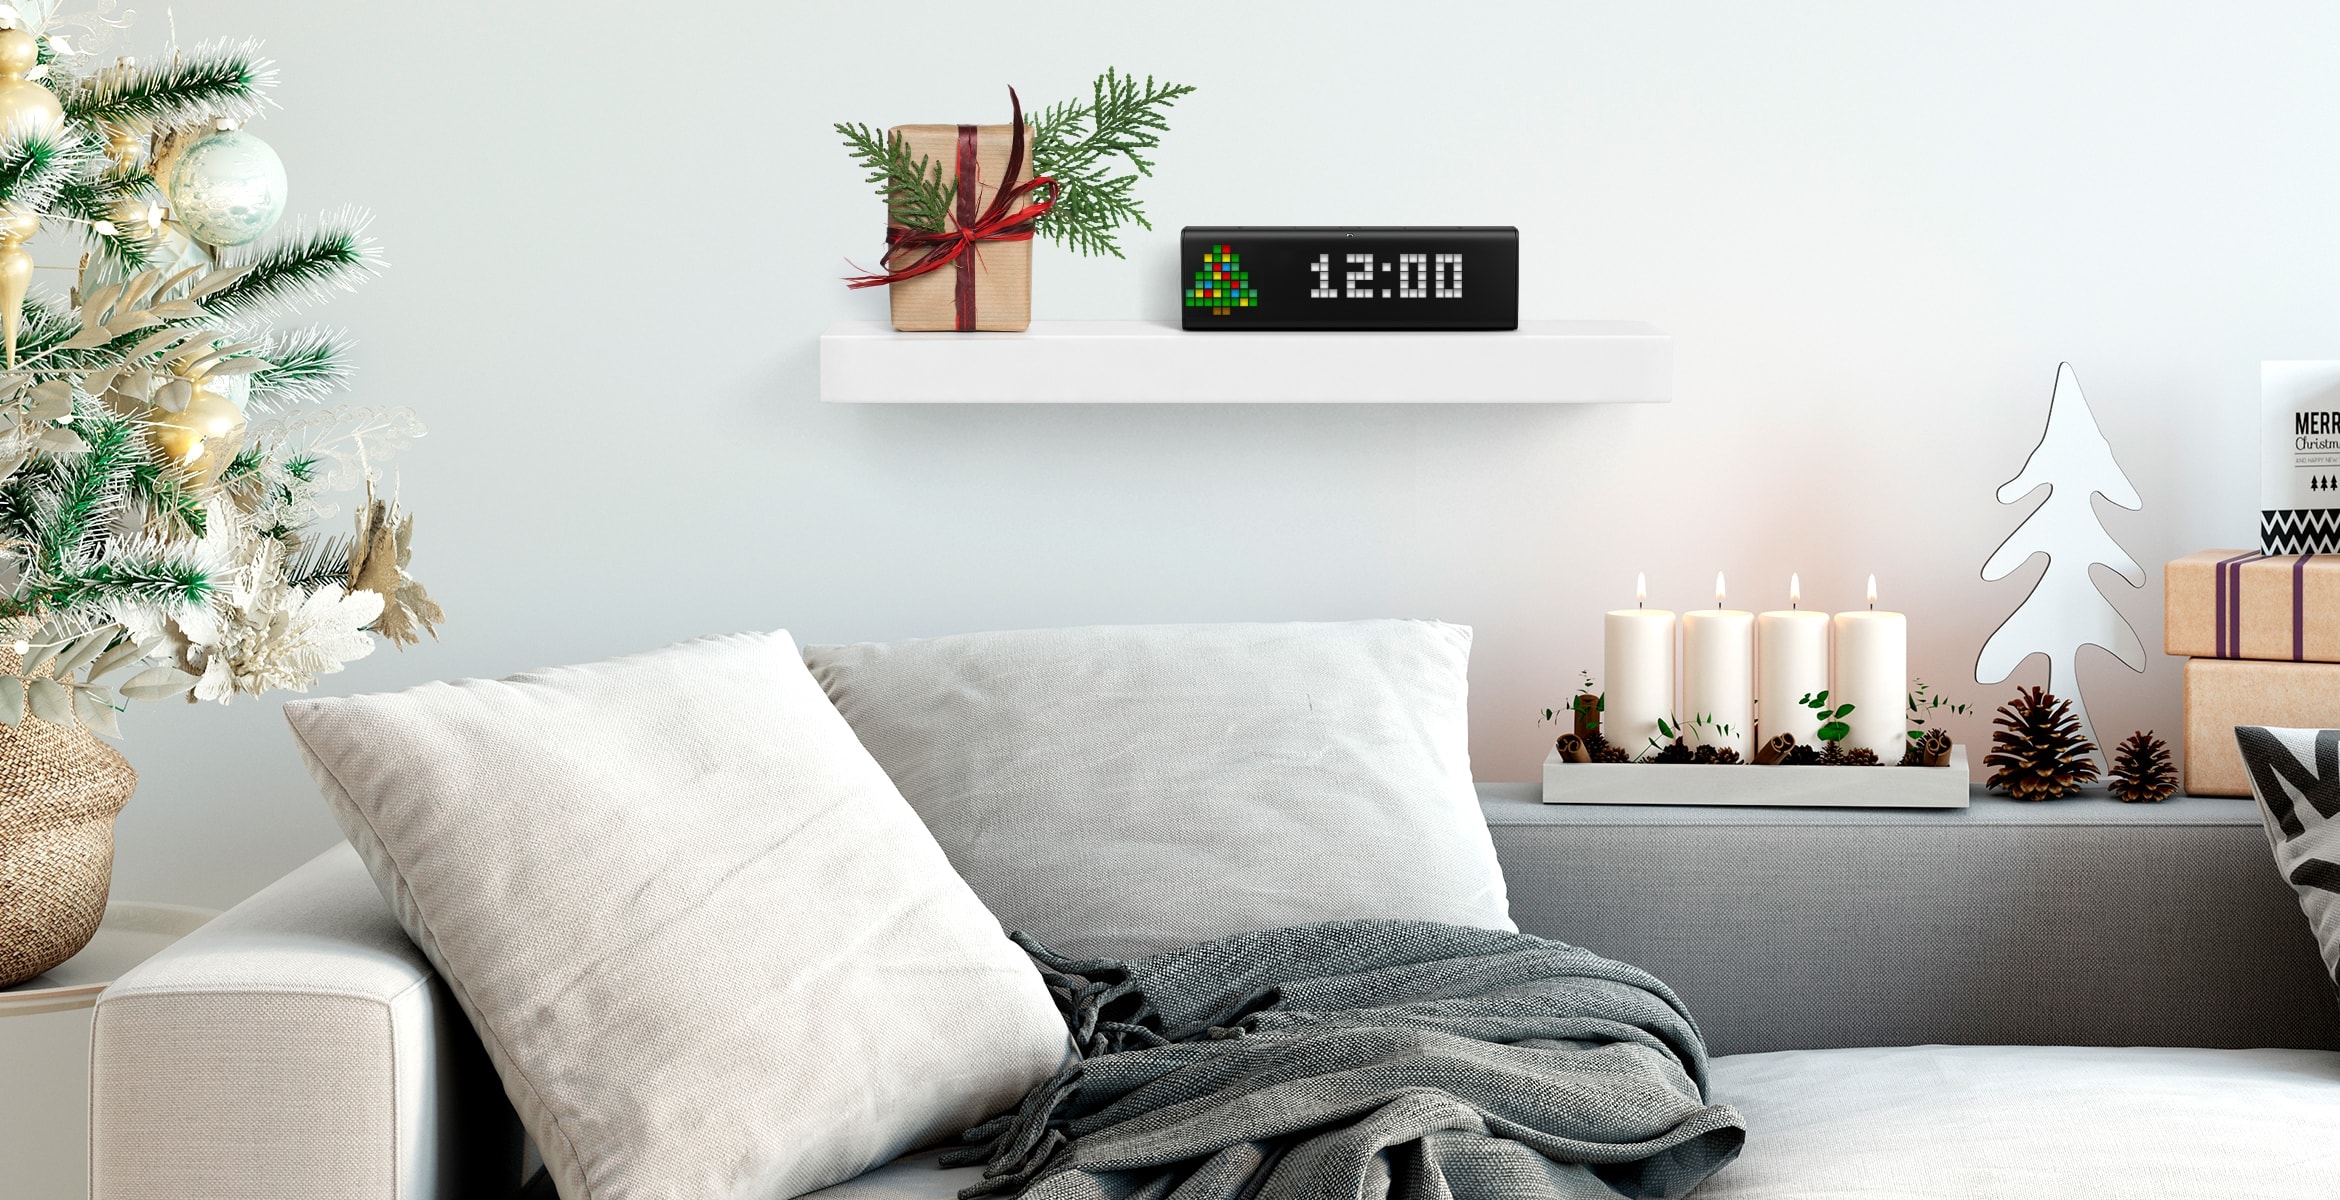 A digital clock stands on a shelf in the room with Christmas decorations, displays time and Christmas tree as a clock face